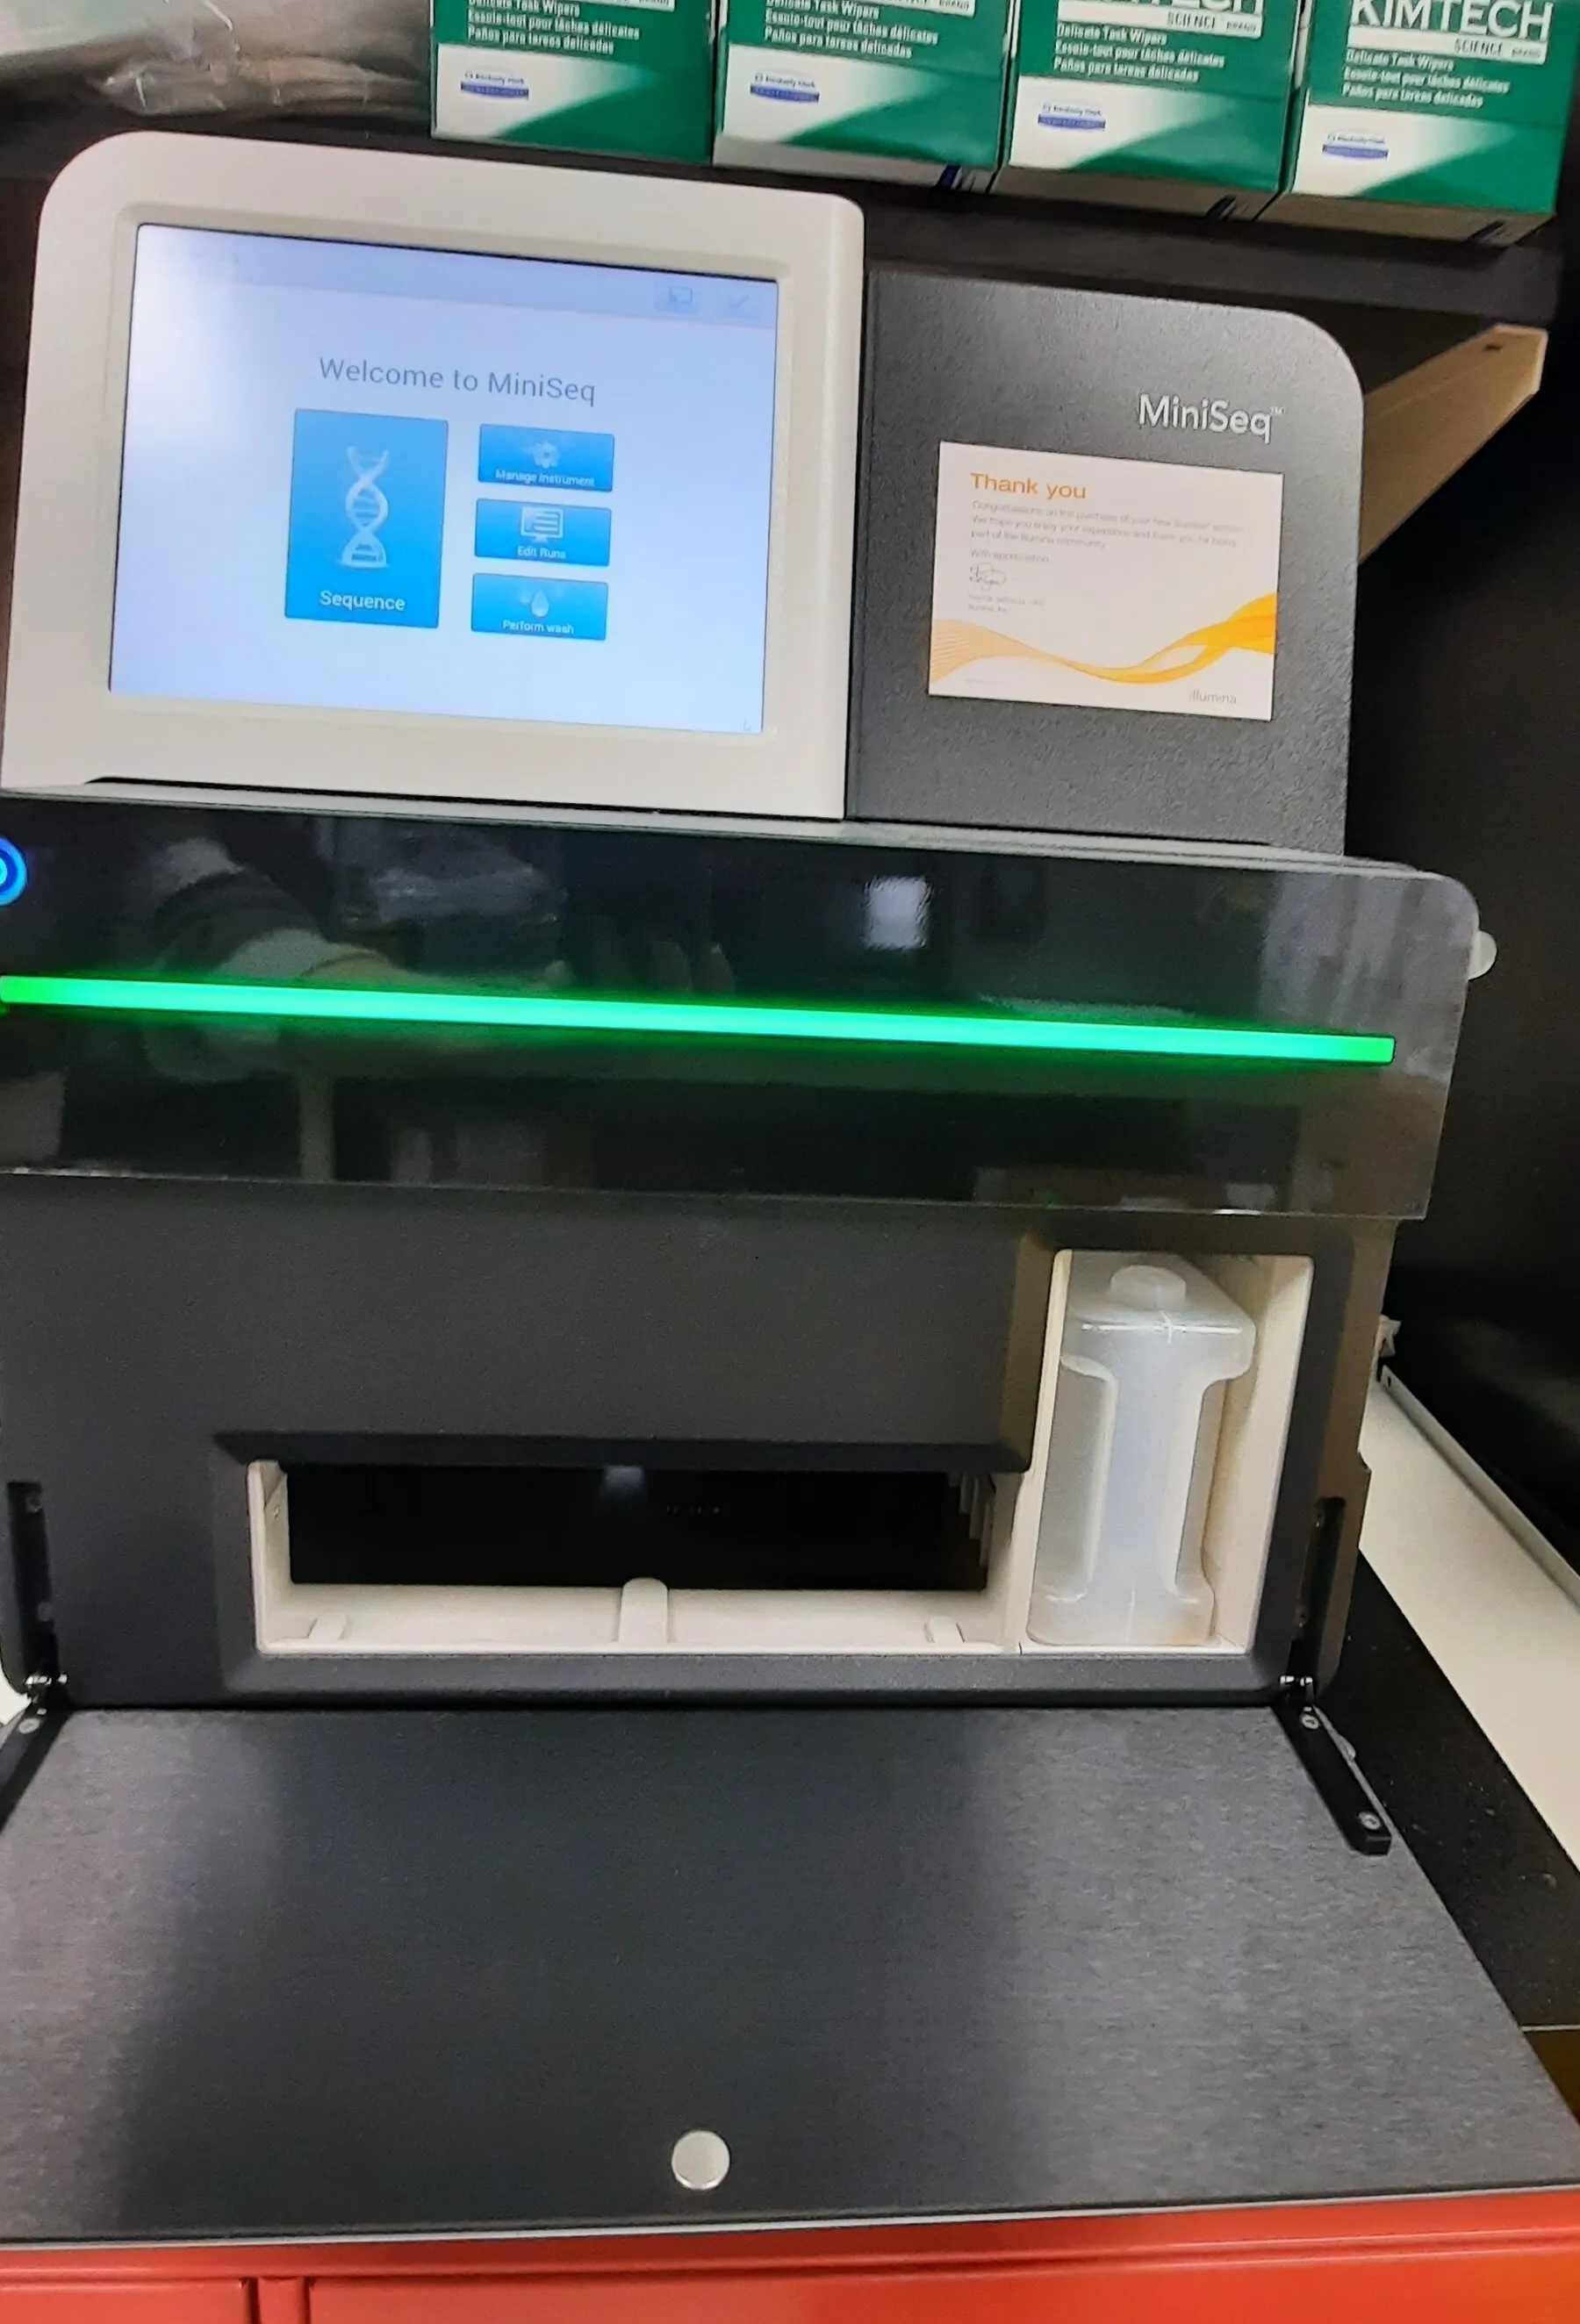  MiniSeq System:  Illumina next-generation sequencing (NGS)  instrument 